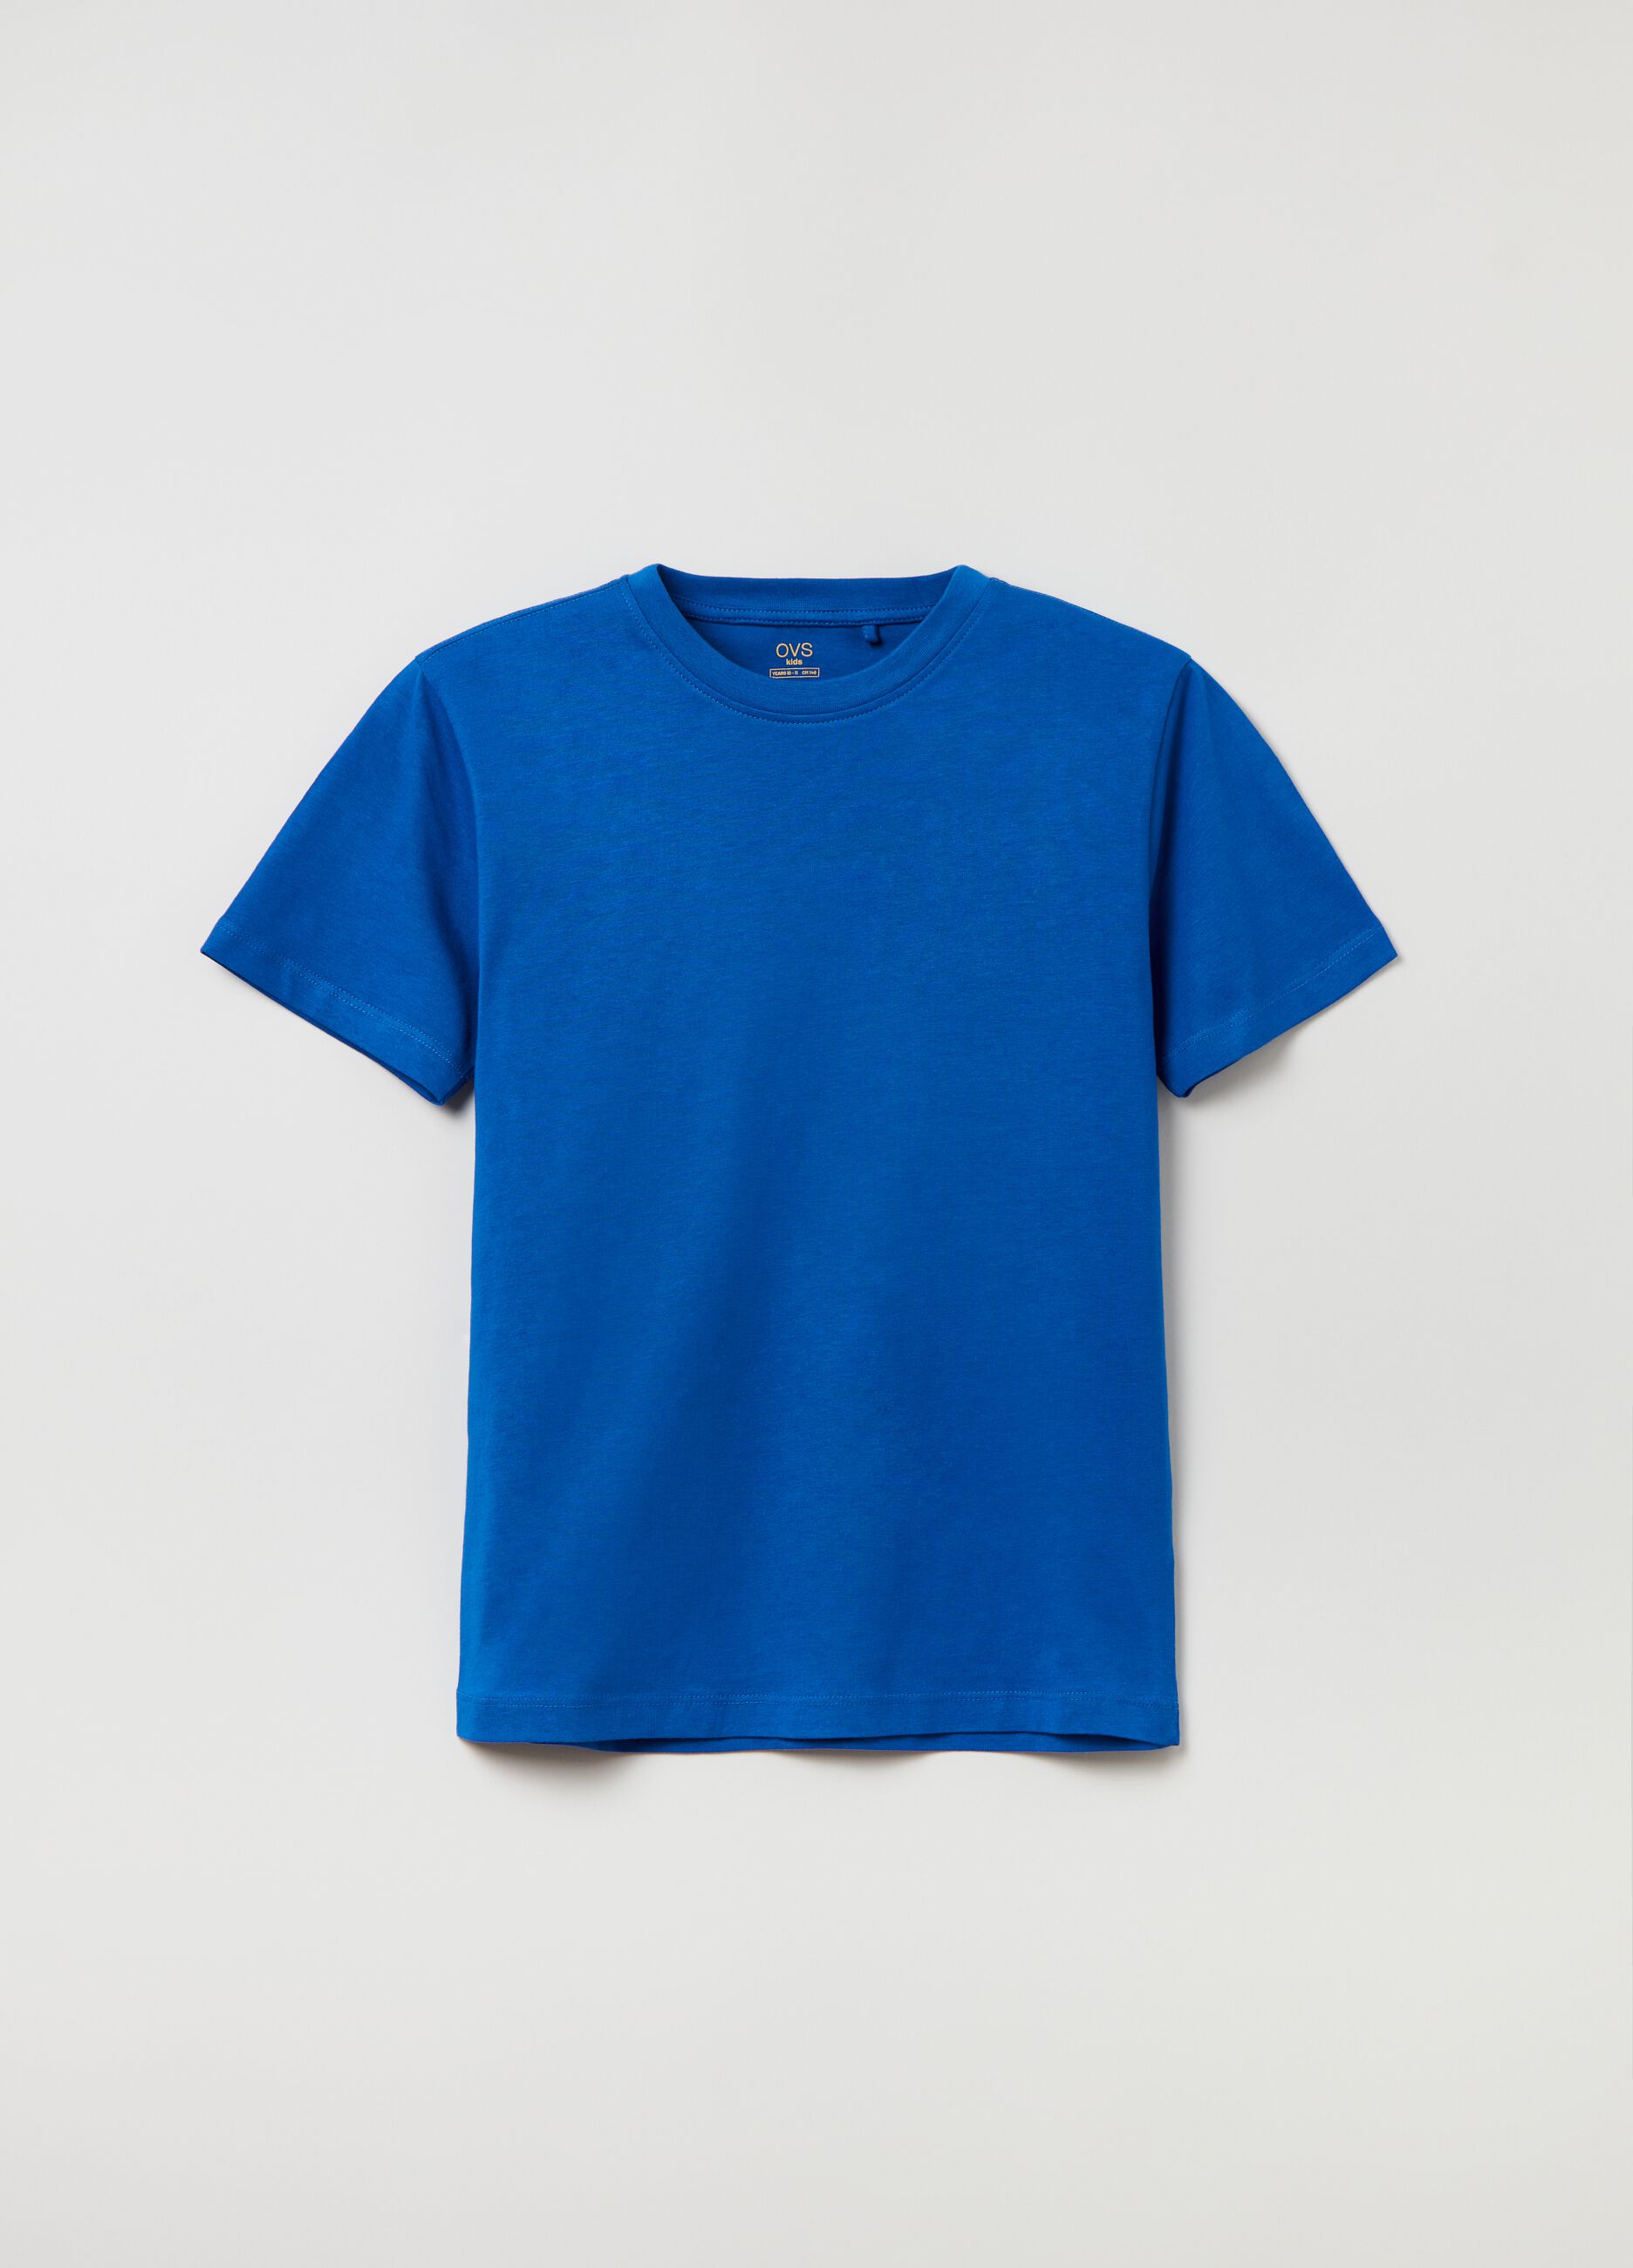 Fitness cotton T-shirt with round neck